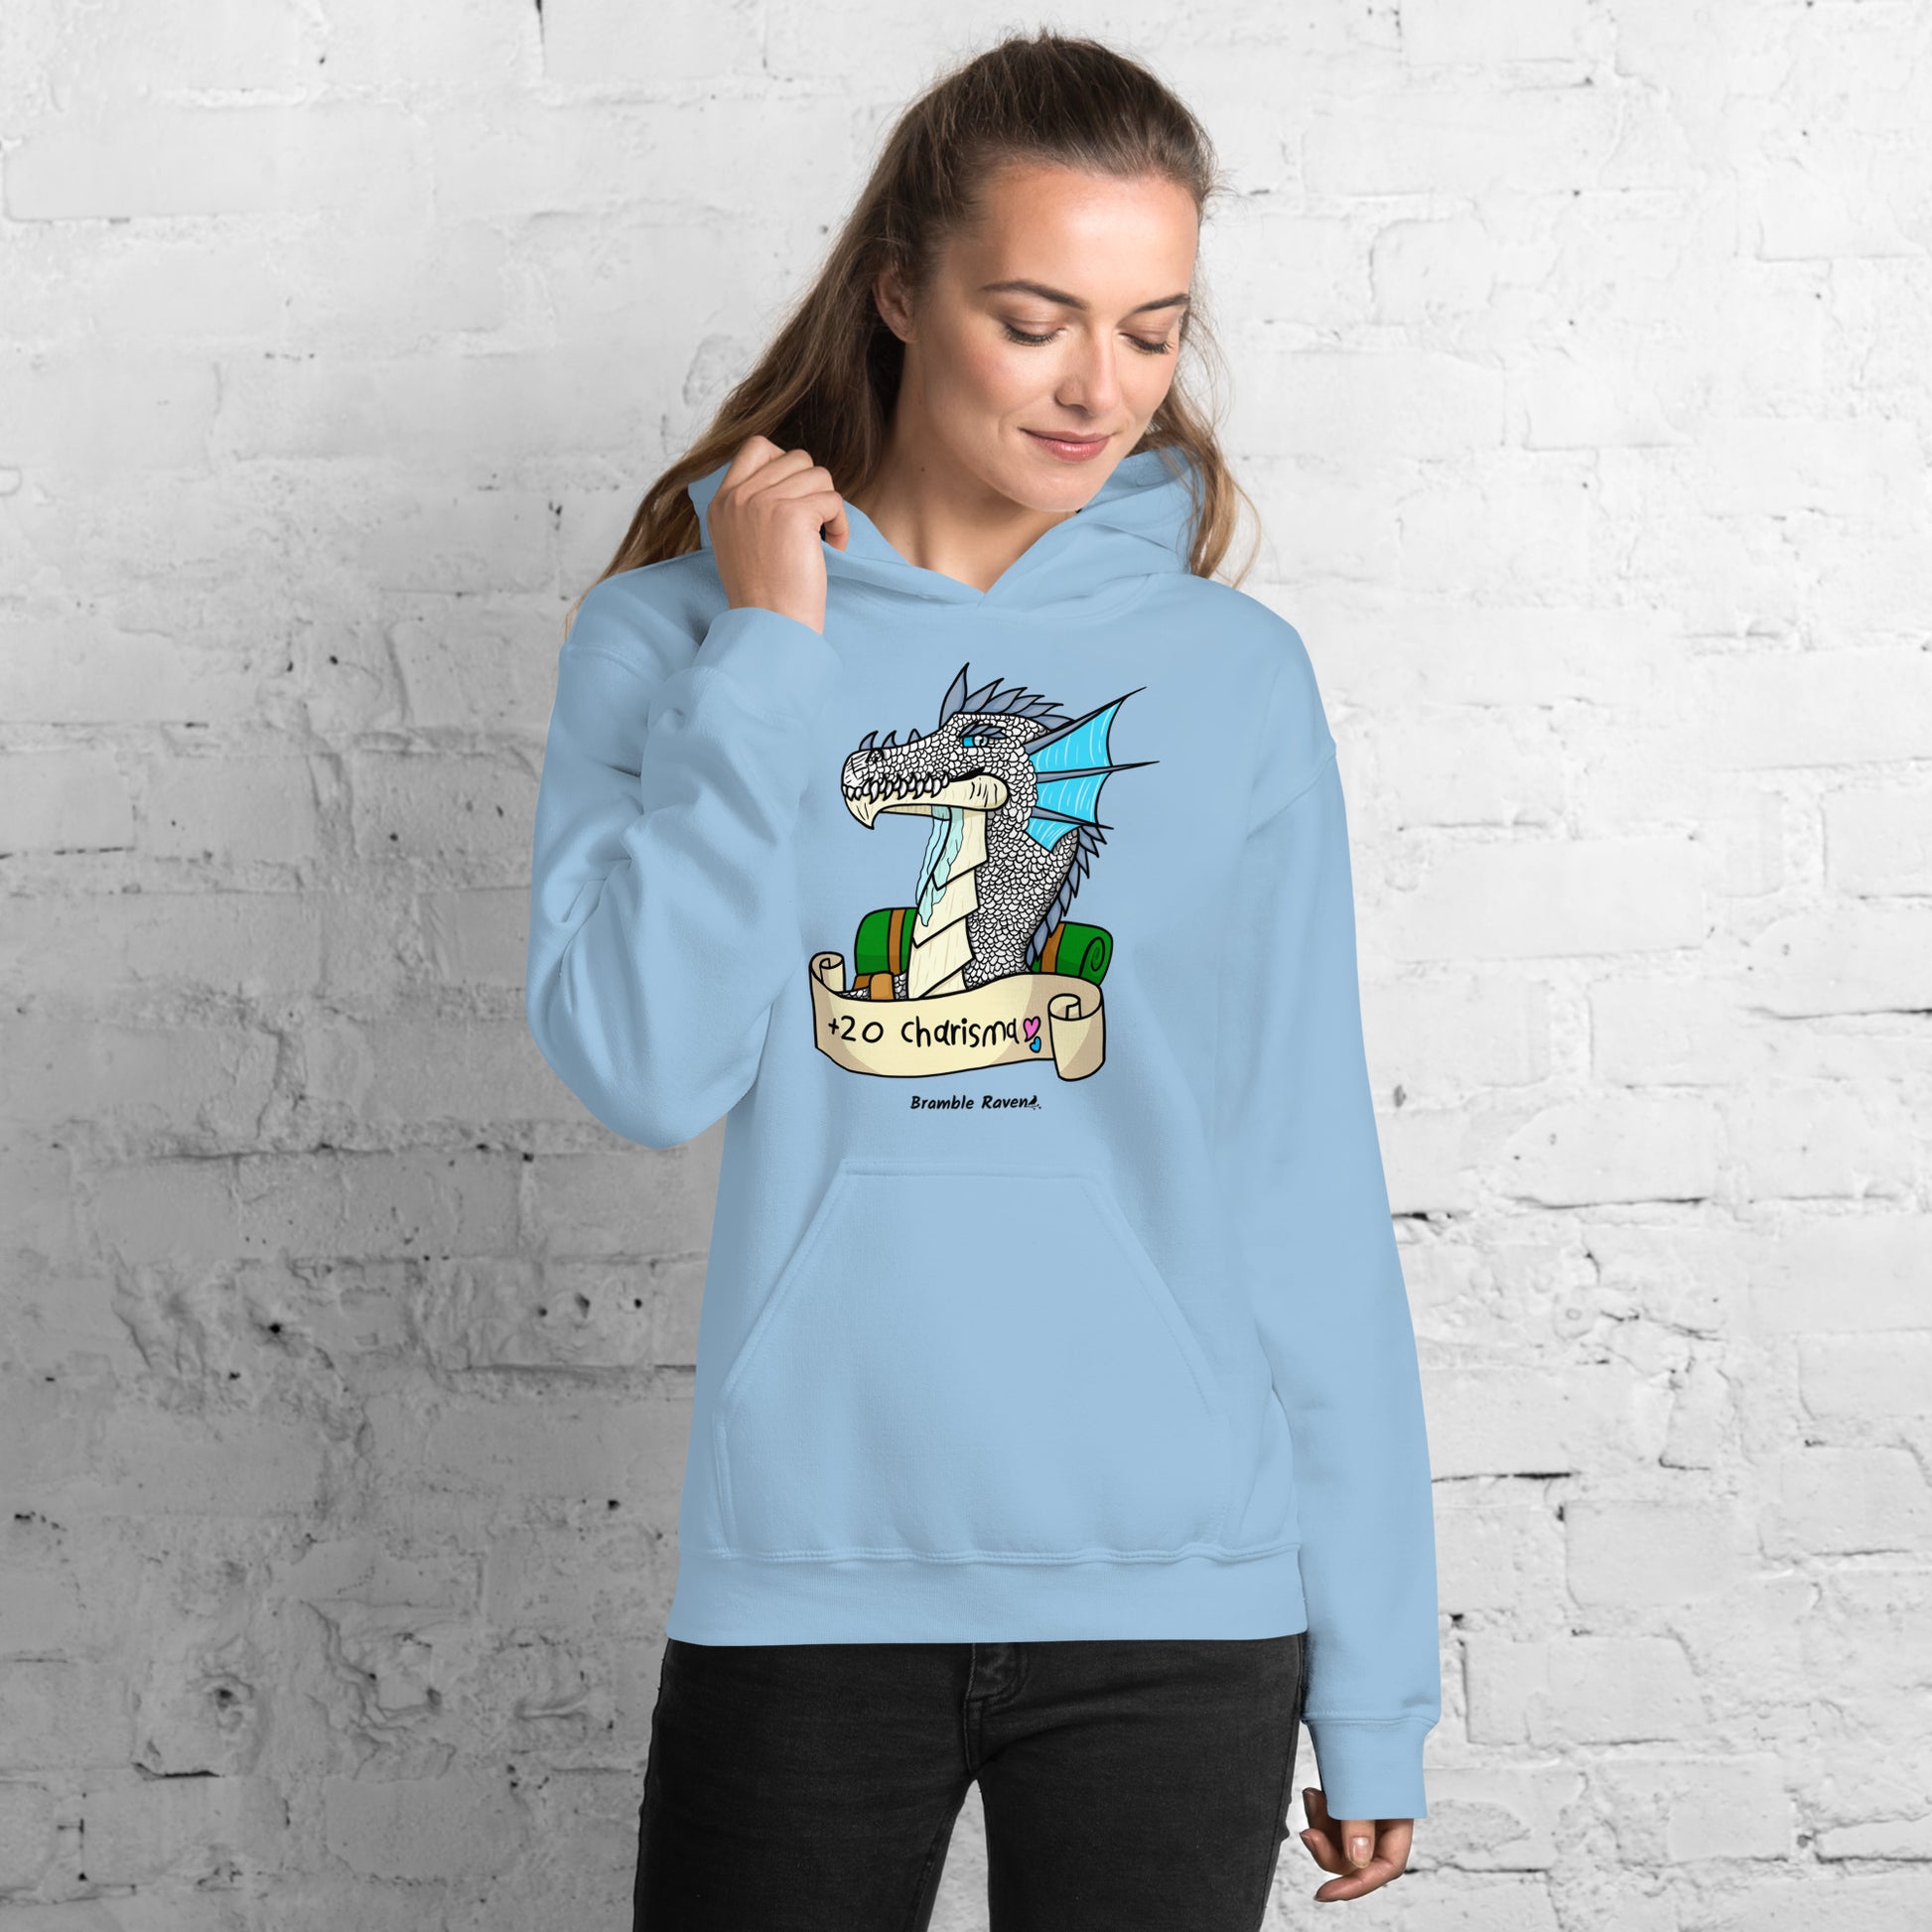 Original Bicycle the Bard dragon +20 Charisma design on unisex light blue colored hoodie. Shown on female model.